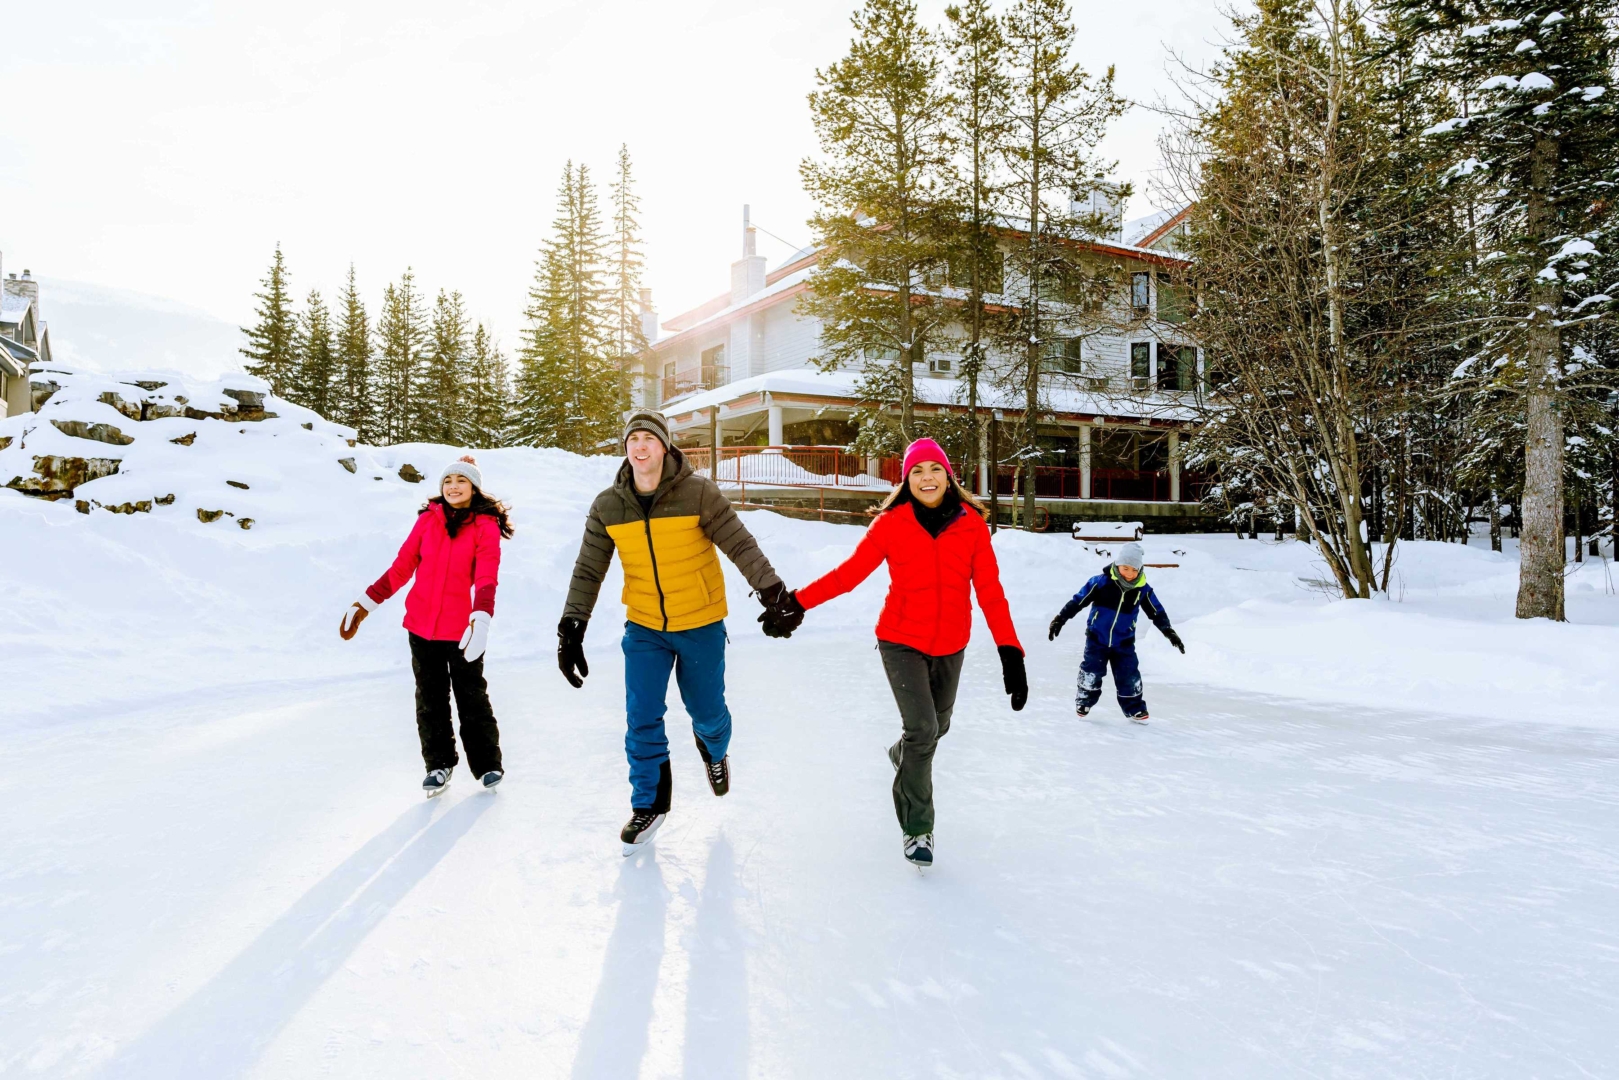 The Festive Season Brings a Magical Touch, with Myriad Things to Do in Canmore in Winter